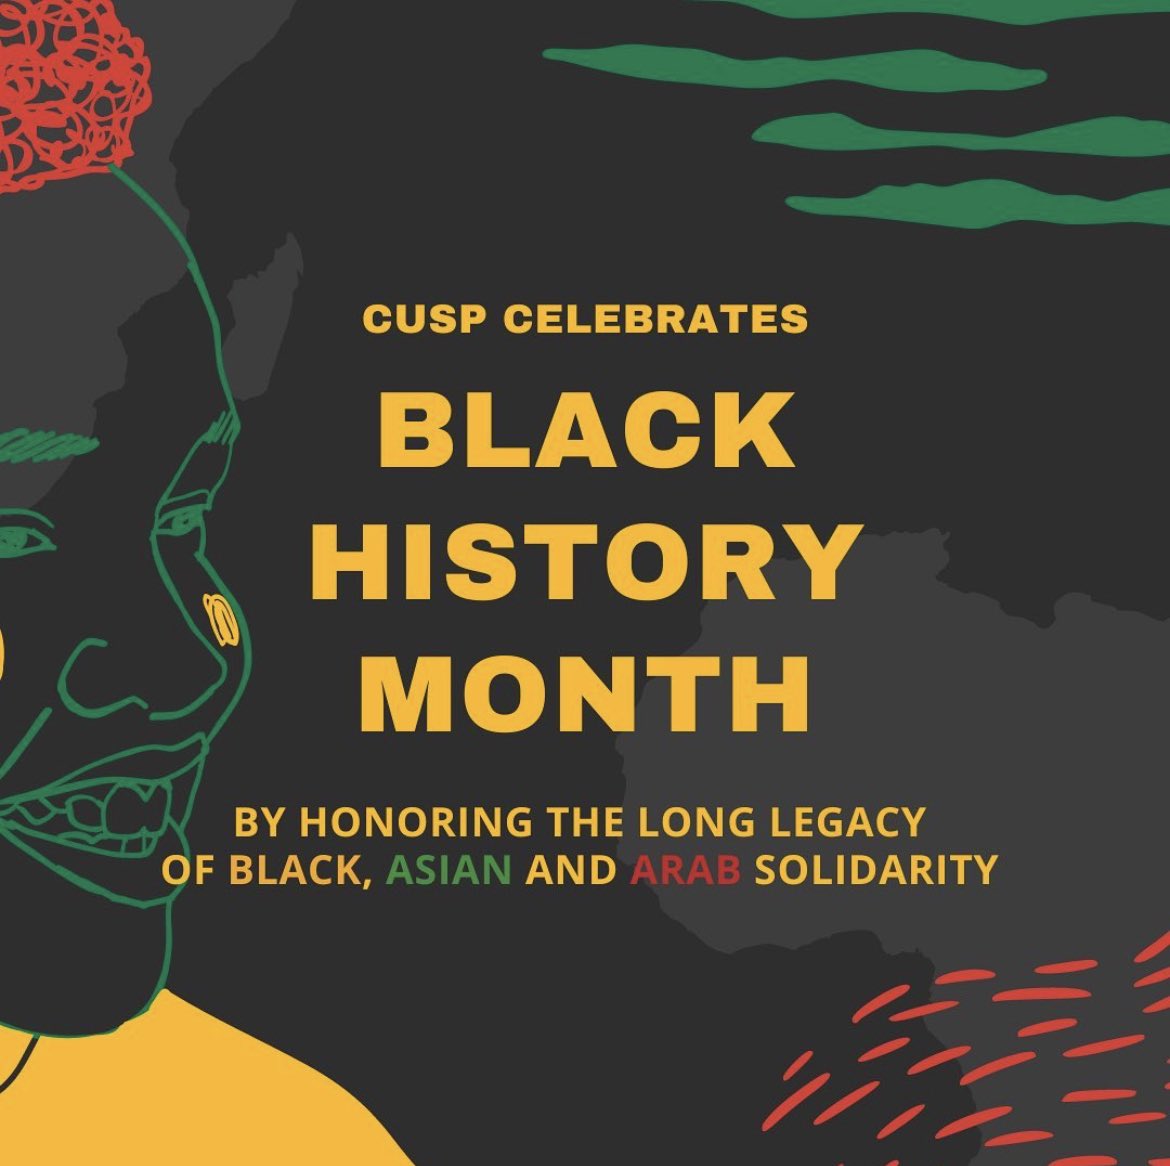 Black & brown solidarity has a long history that’s often erased but we’re here to celebrate it! Especially during Black History Month. Scroll down to learn more about the Ban Dung Conference & let us know what you think in the comments ⬇️

#immigrationisablackissue #immigration